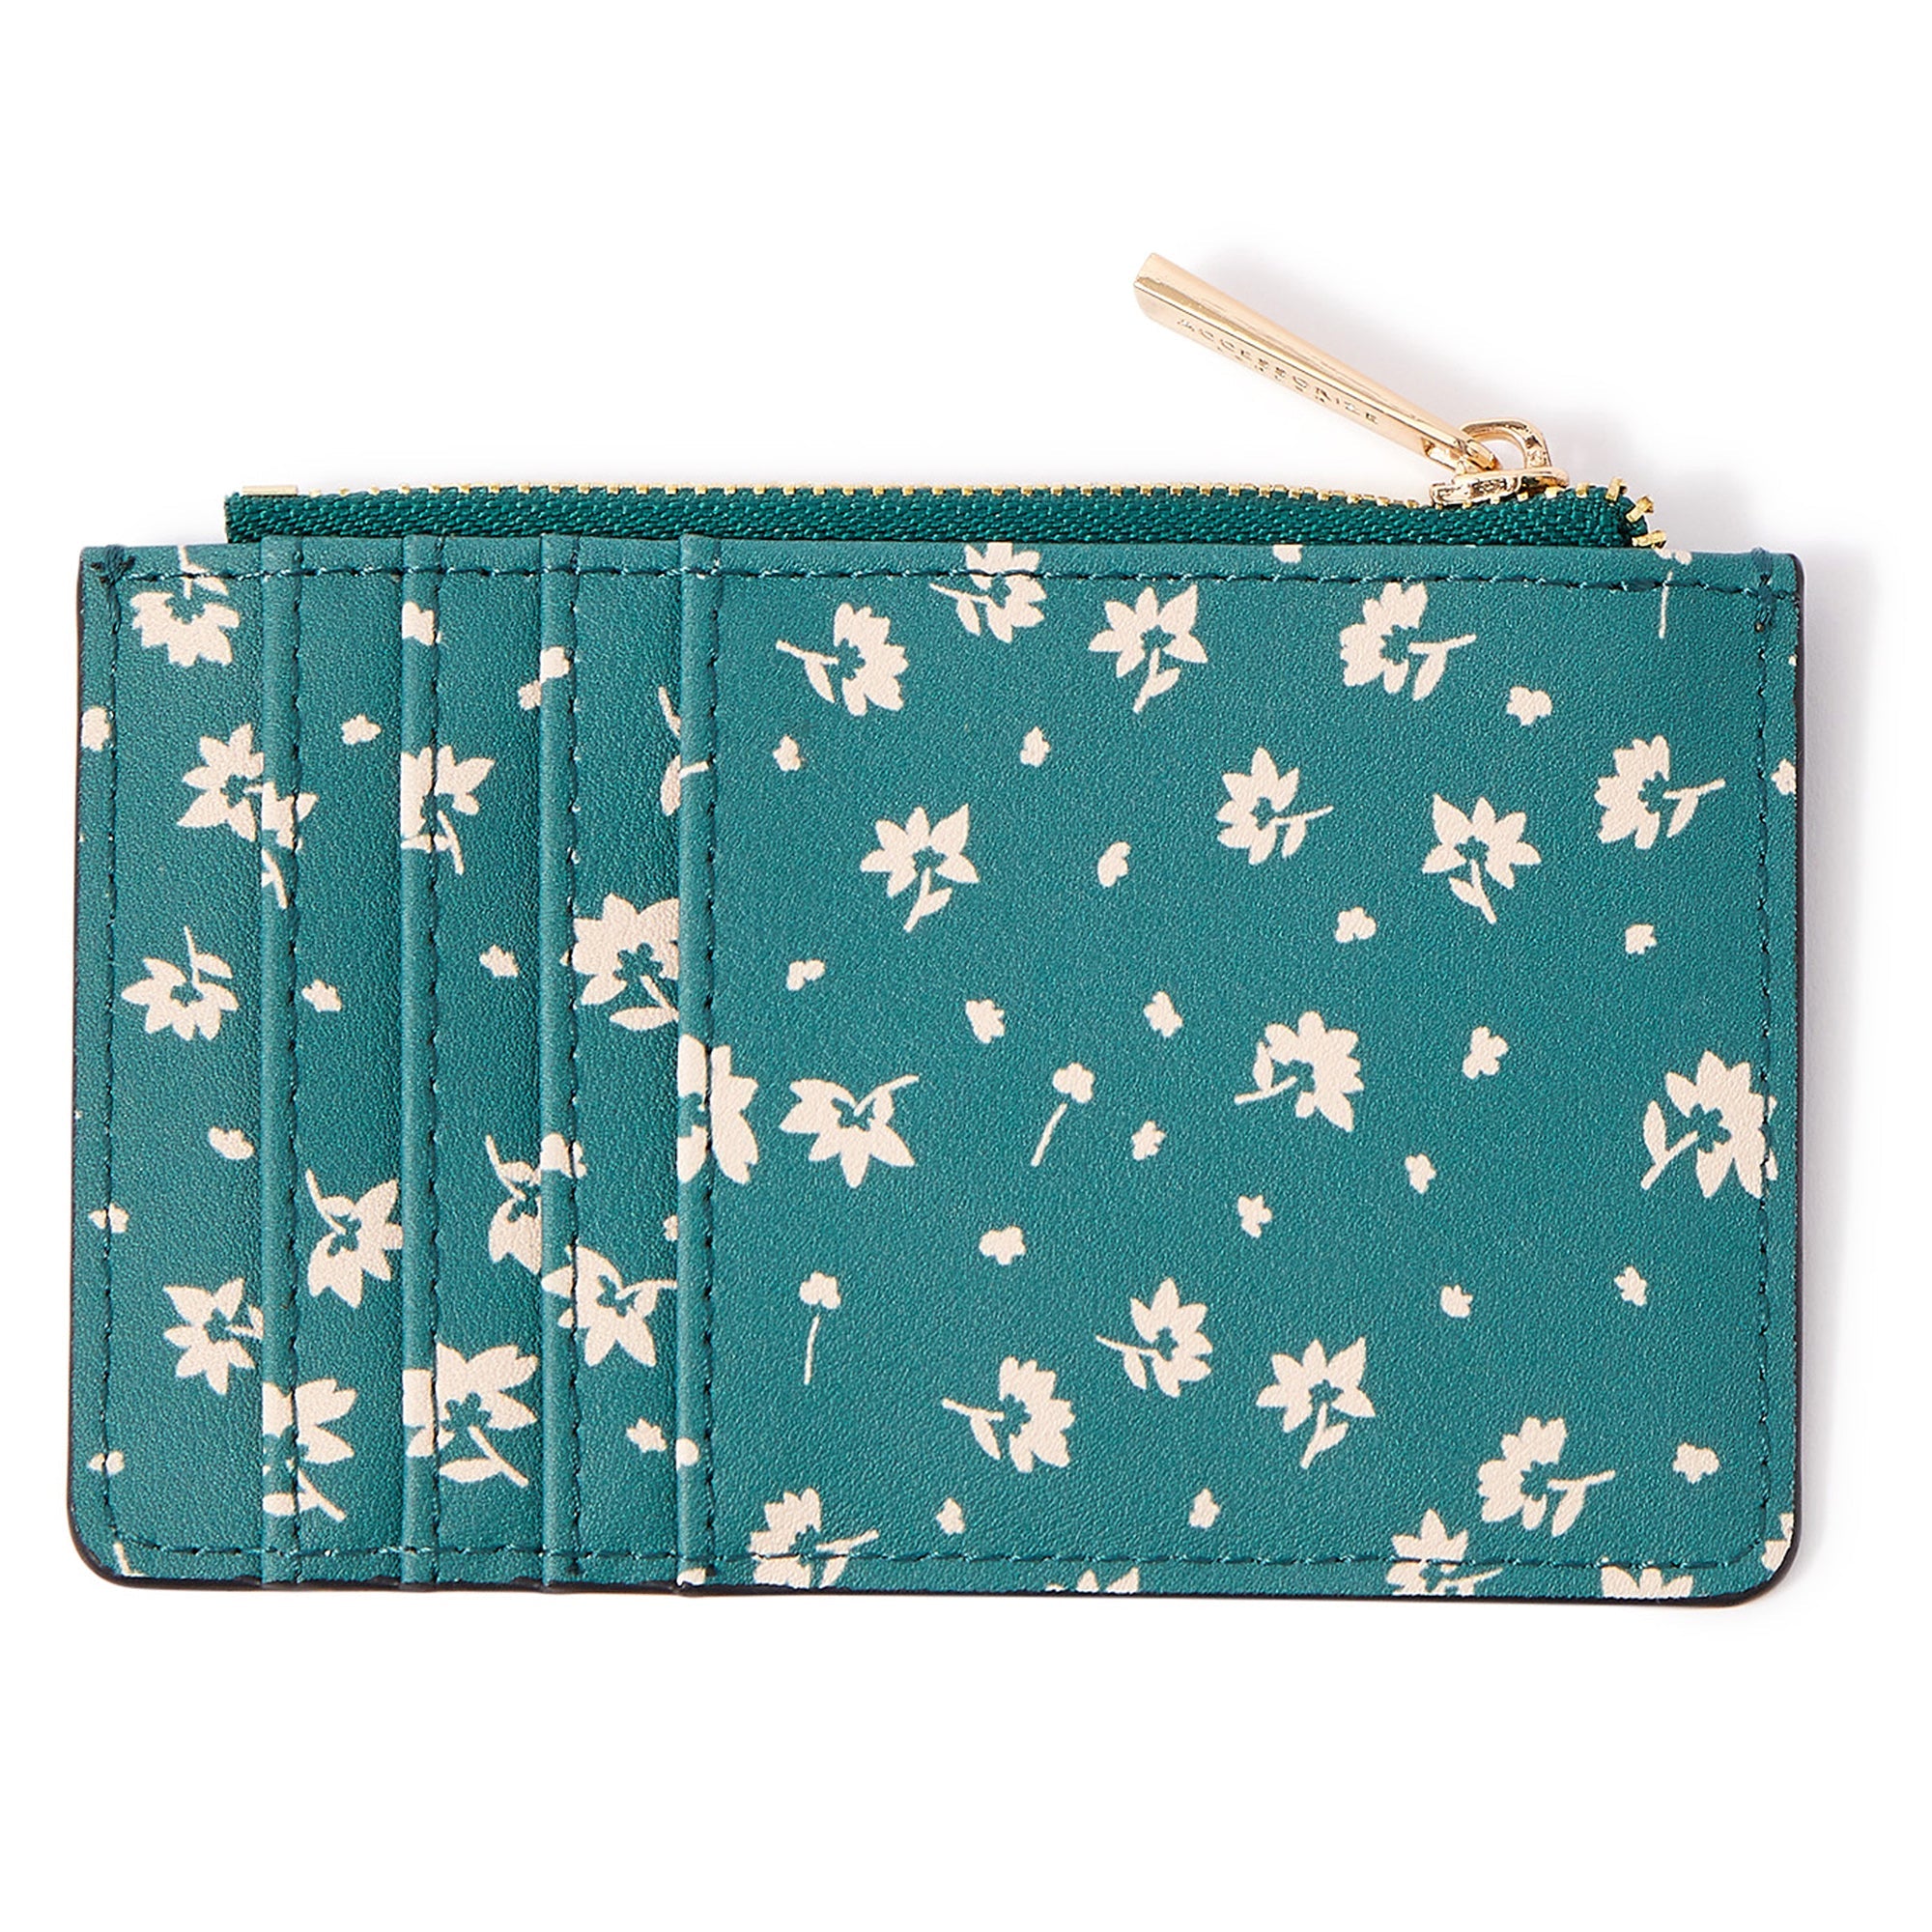 Accessorize London Women's Faux Leather Green Ditsy Print Cardholder